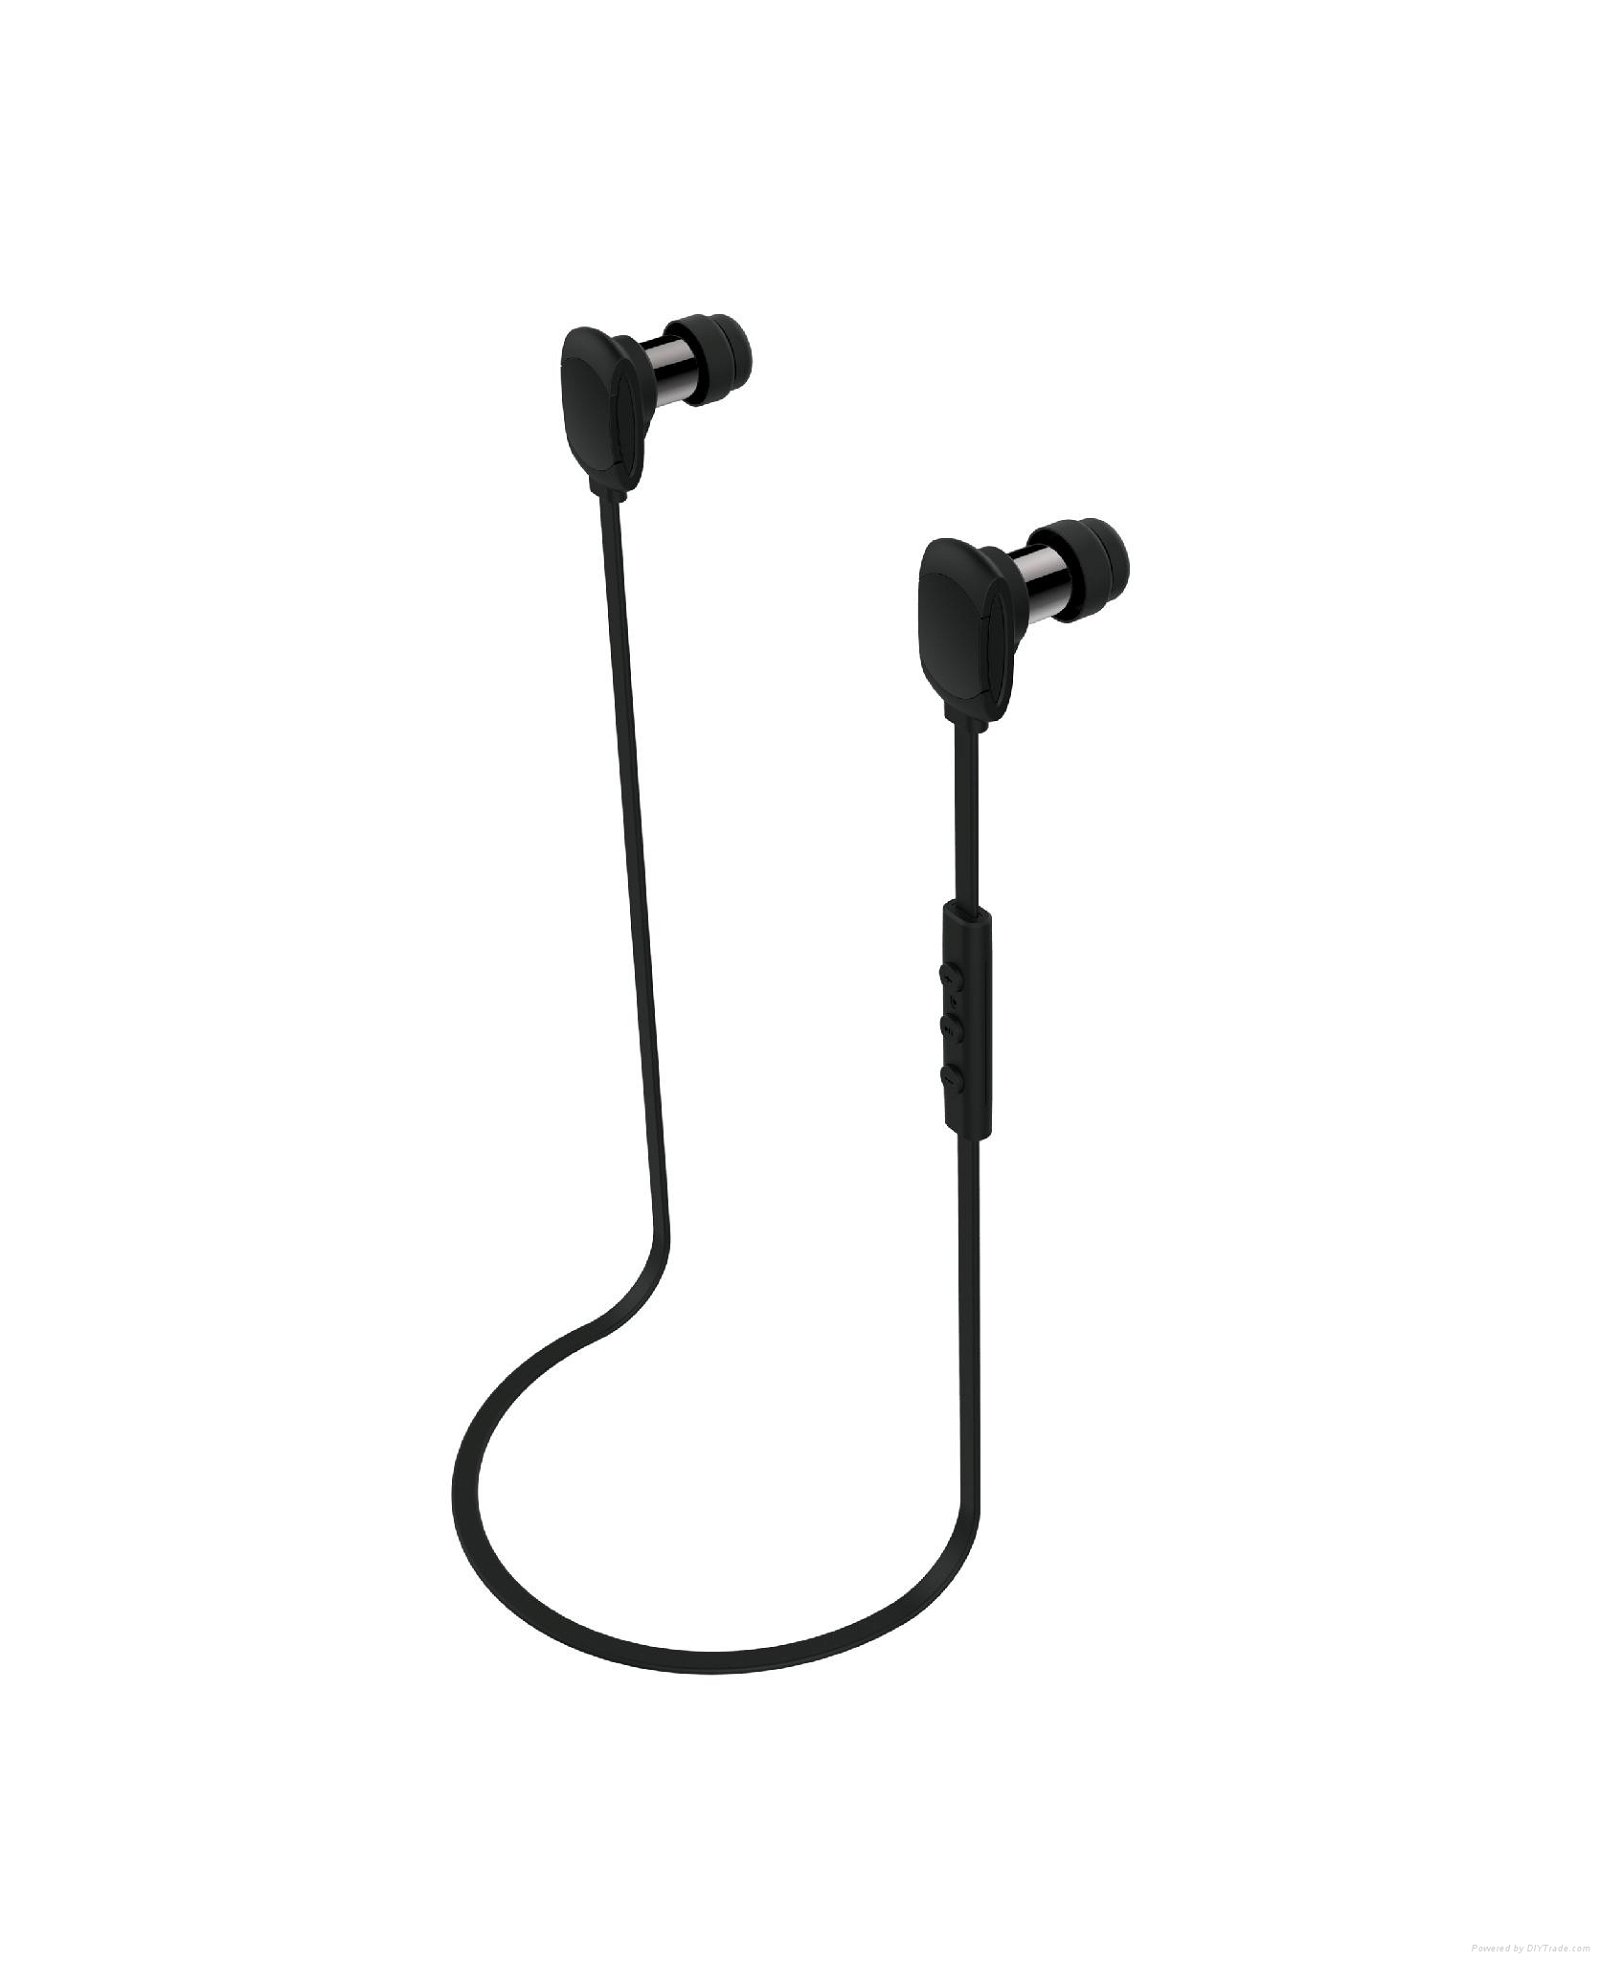 uper Mini Sporty Bluetooth Stereo Earbuds LV-BH08 3